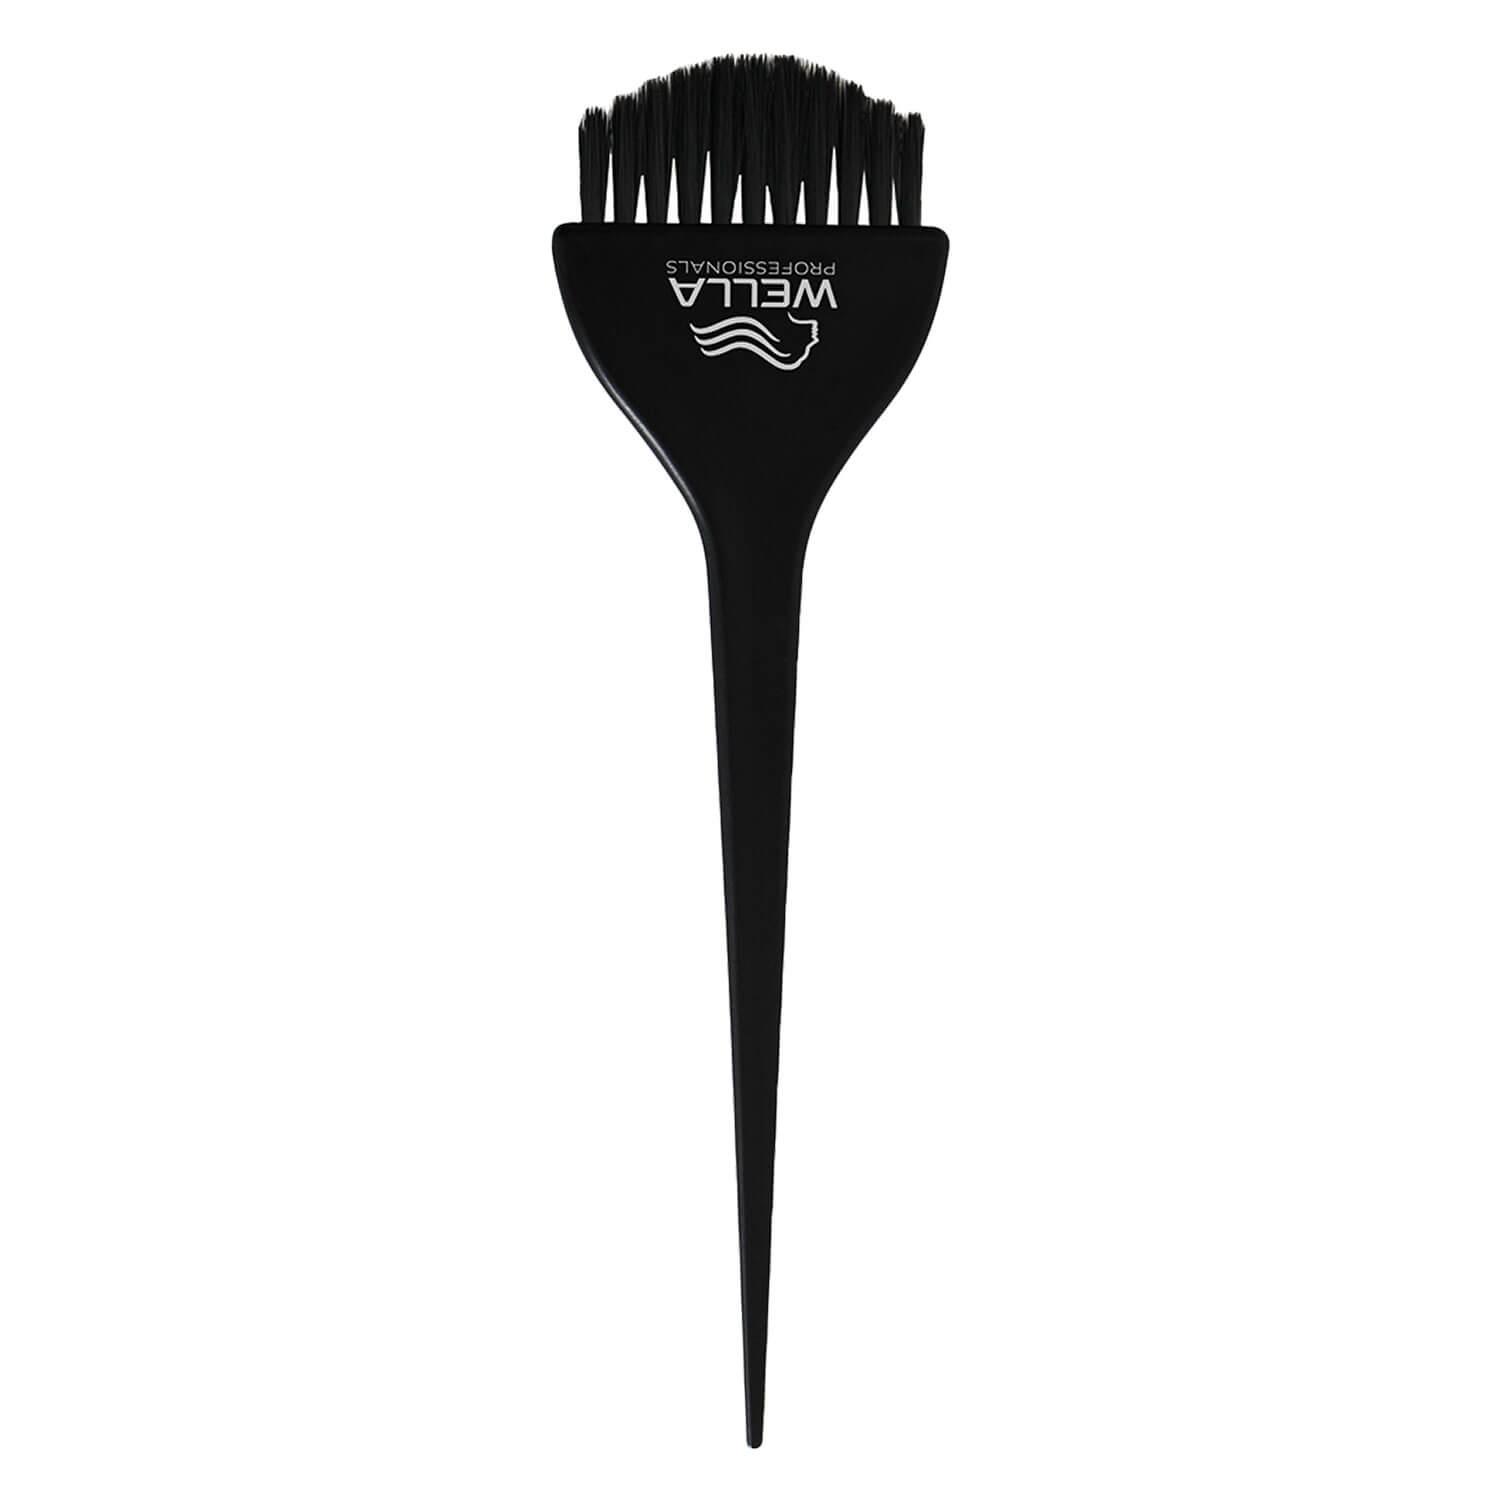 Wella Tools - Freehand Brush rounded